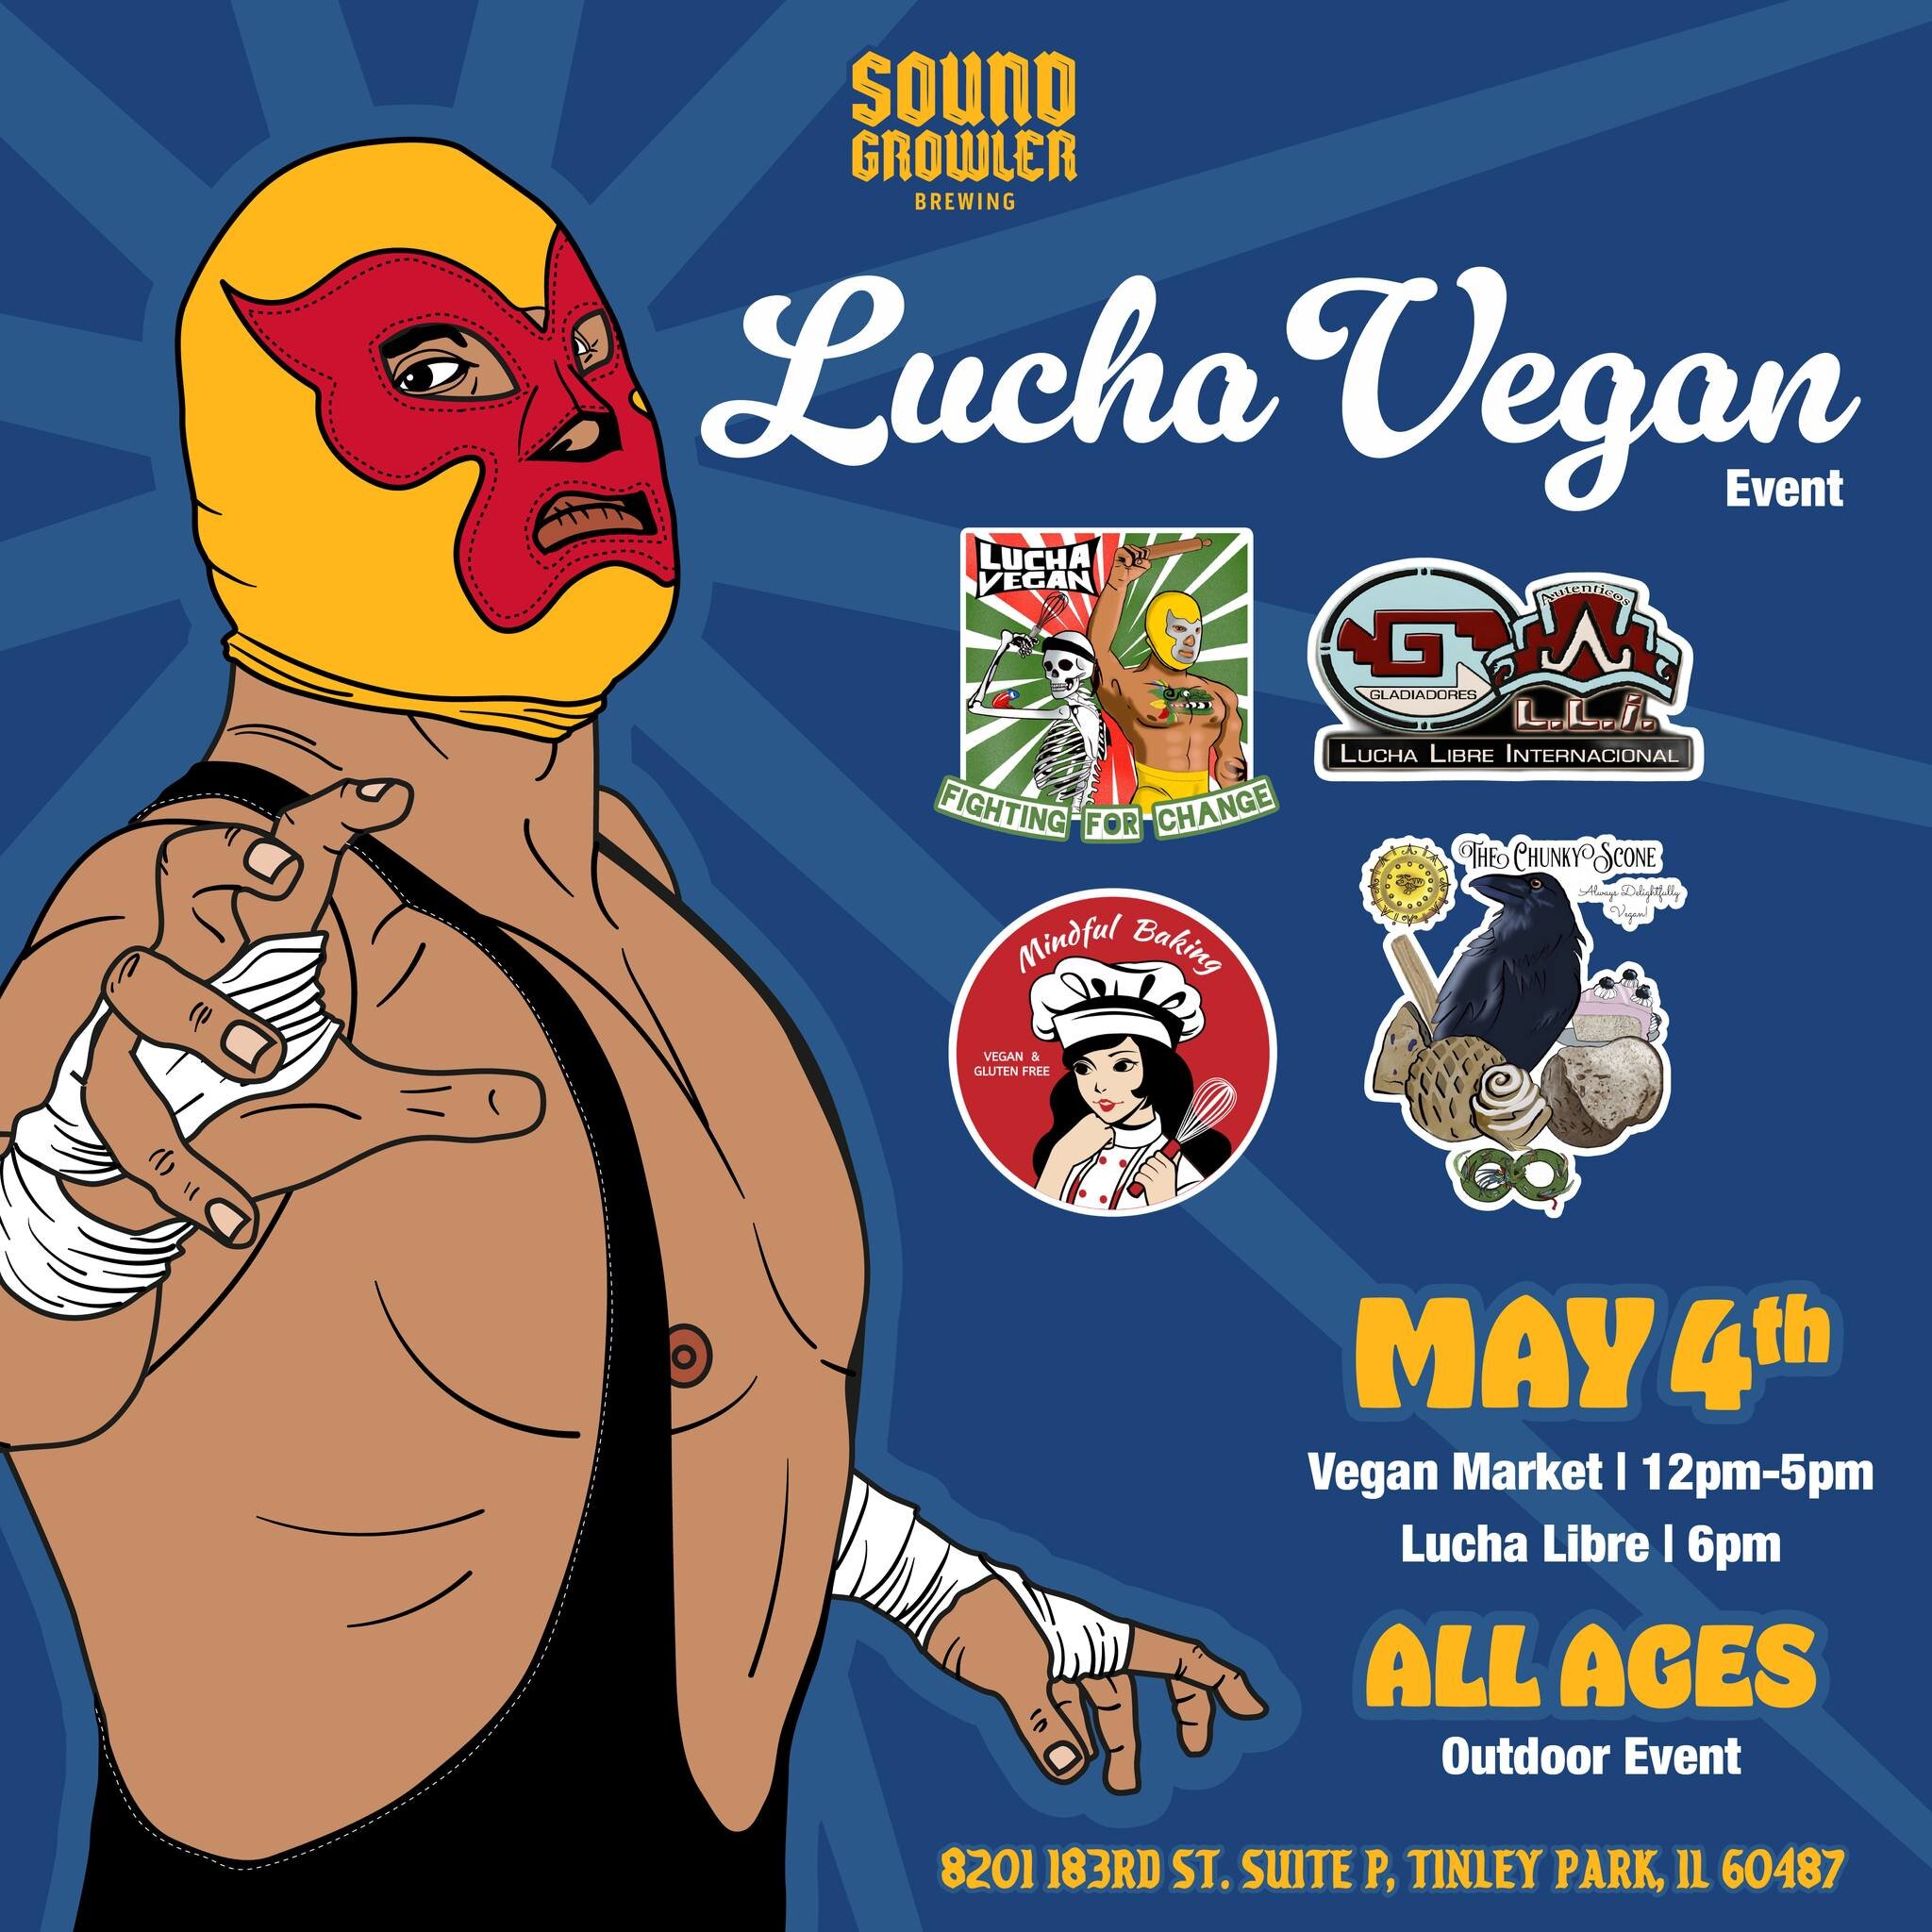 Get ready for the ultimate fusion of fun, flavor, and flair at Soundgrowler Brewing! Presenting Lucha Vegan (@luchaveganllc) - a unique blend of Lucha Libre and Vegan Market magic! Join us Saturday May 4th for an unforgettable experience:
Vegan Marke